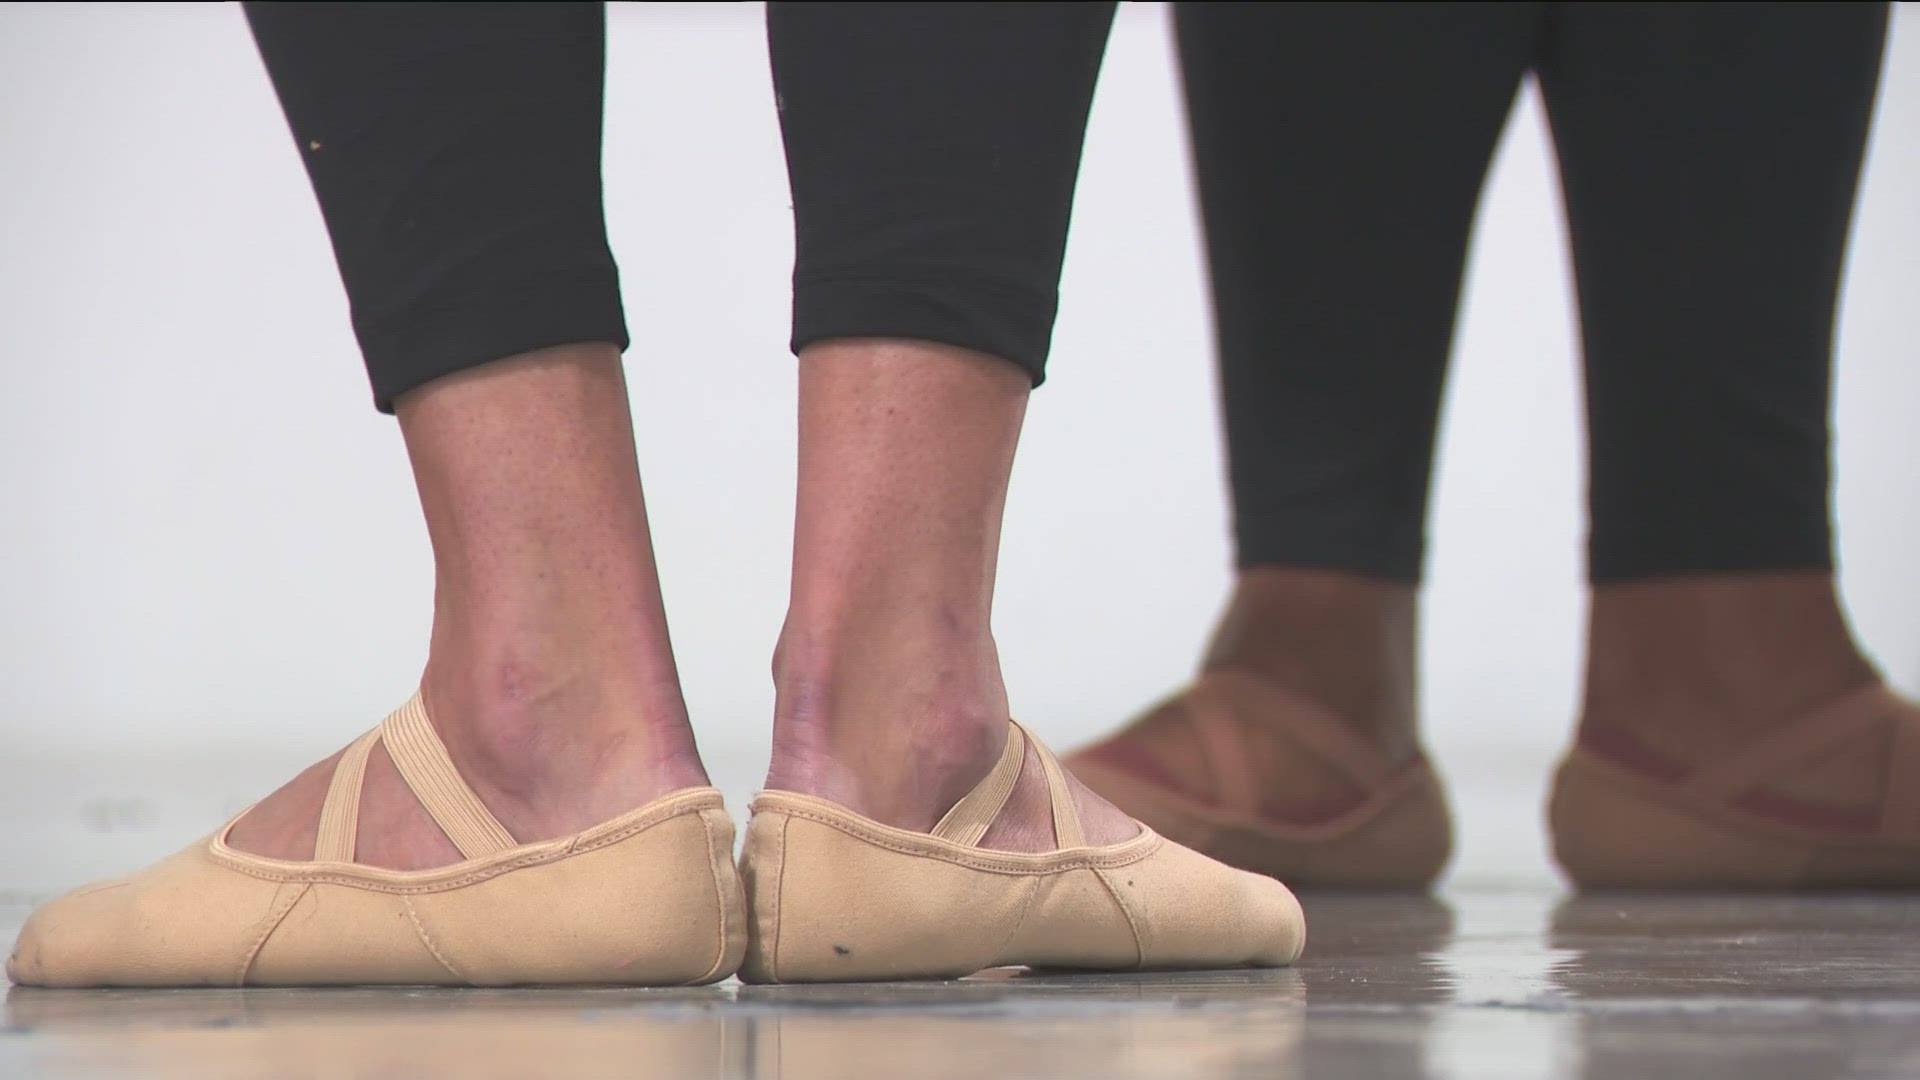 The classes are growing so much in popularity that St. Paul Ballet is looking to add even more capacity.